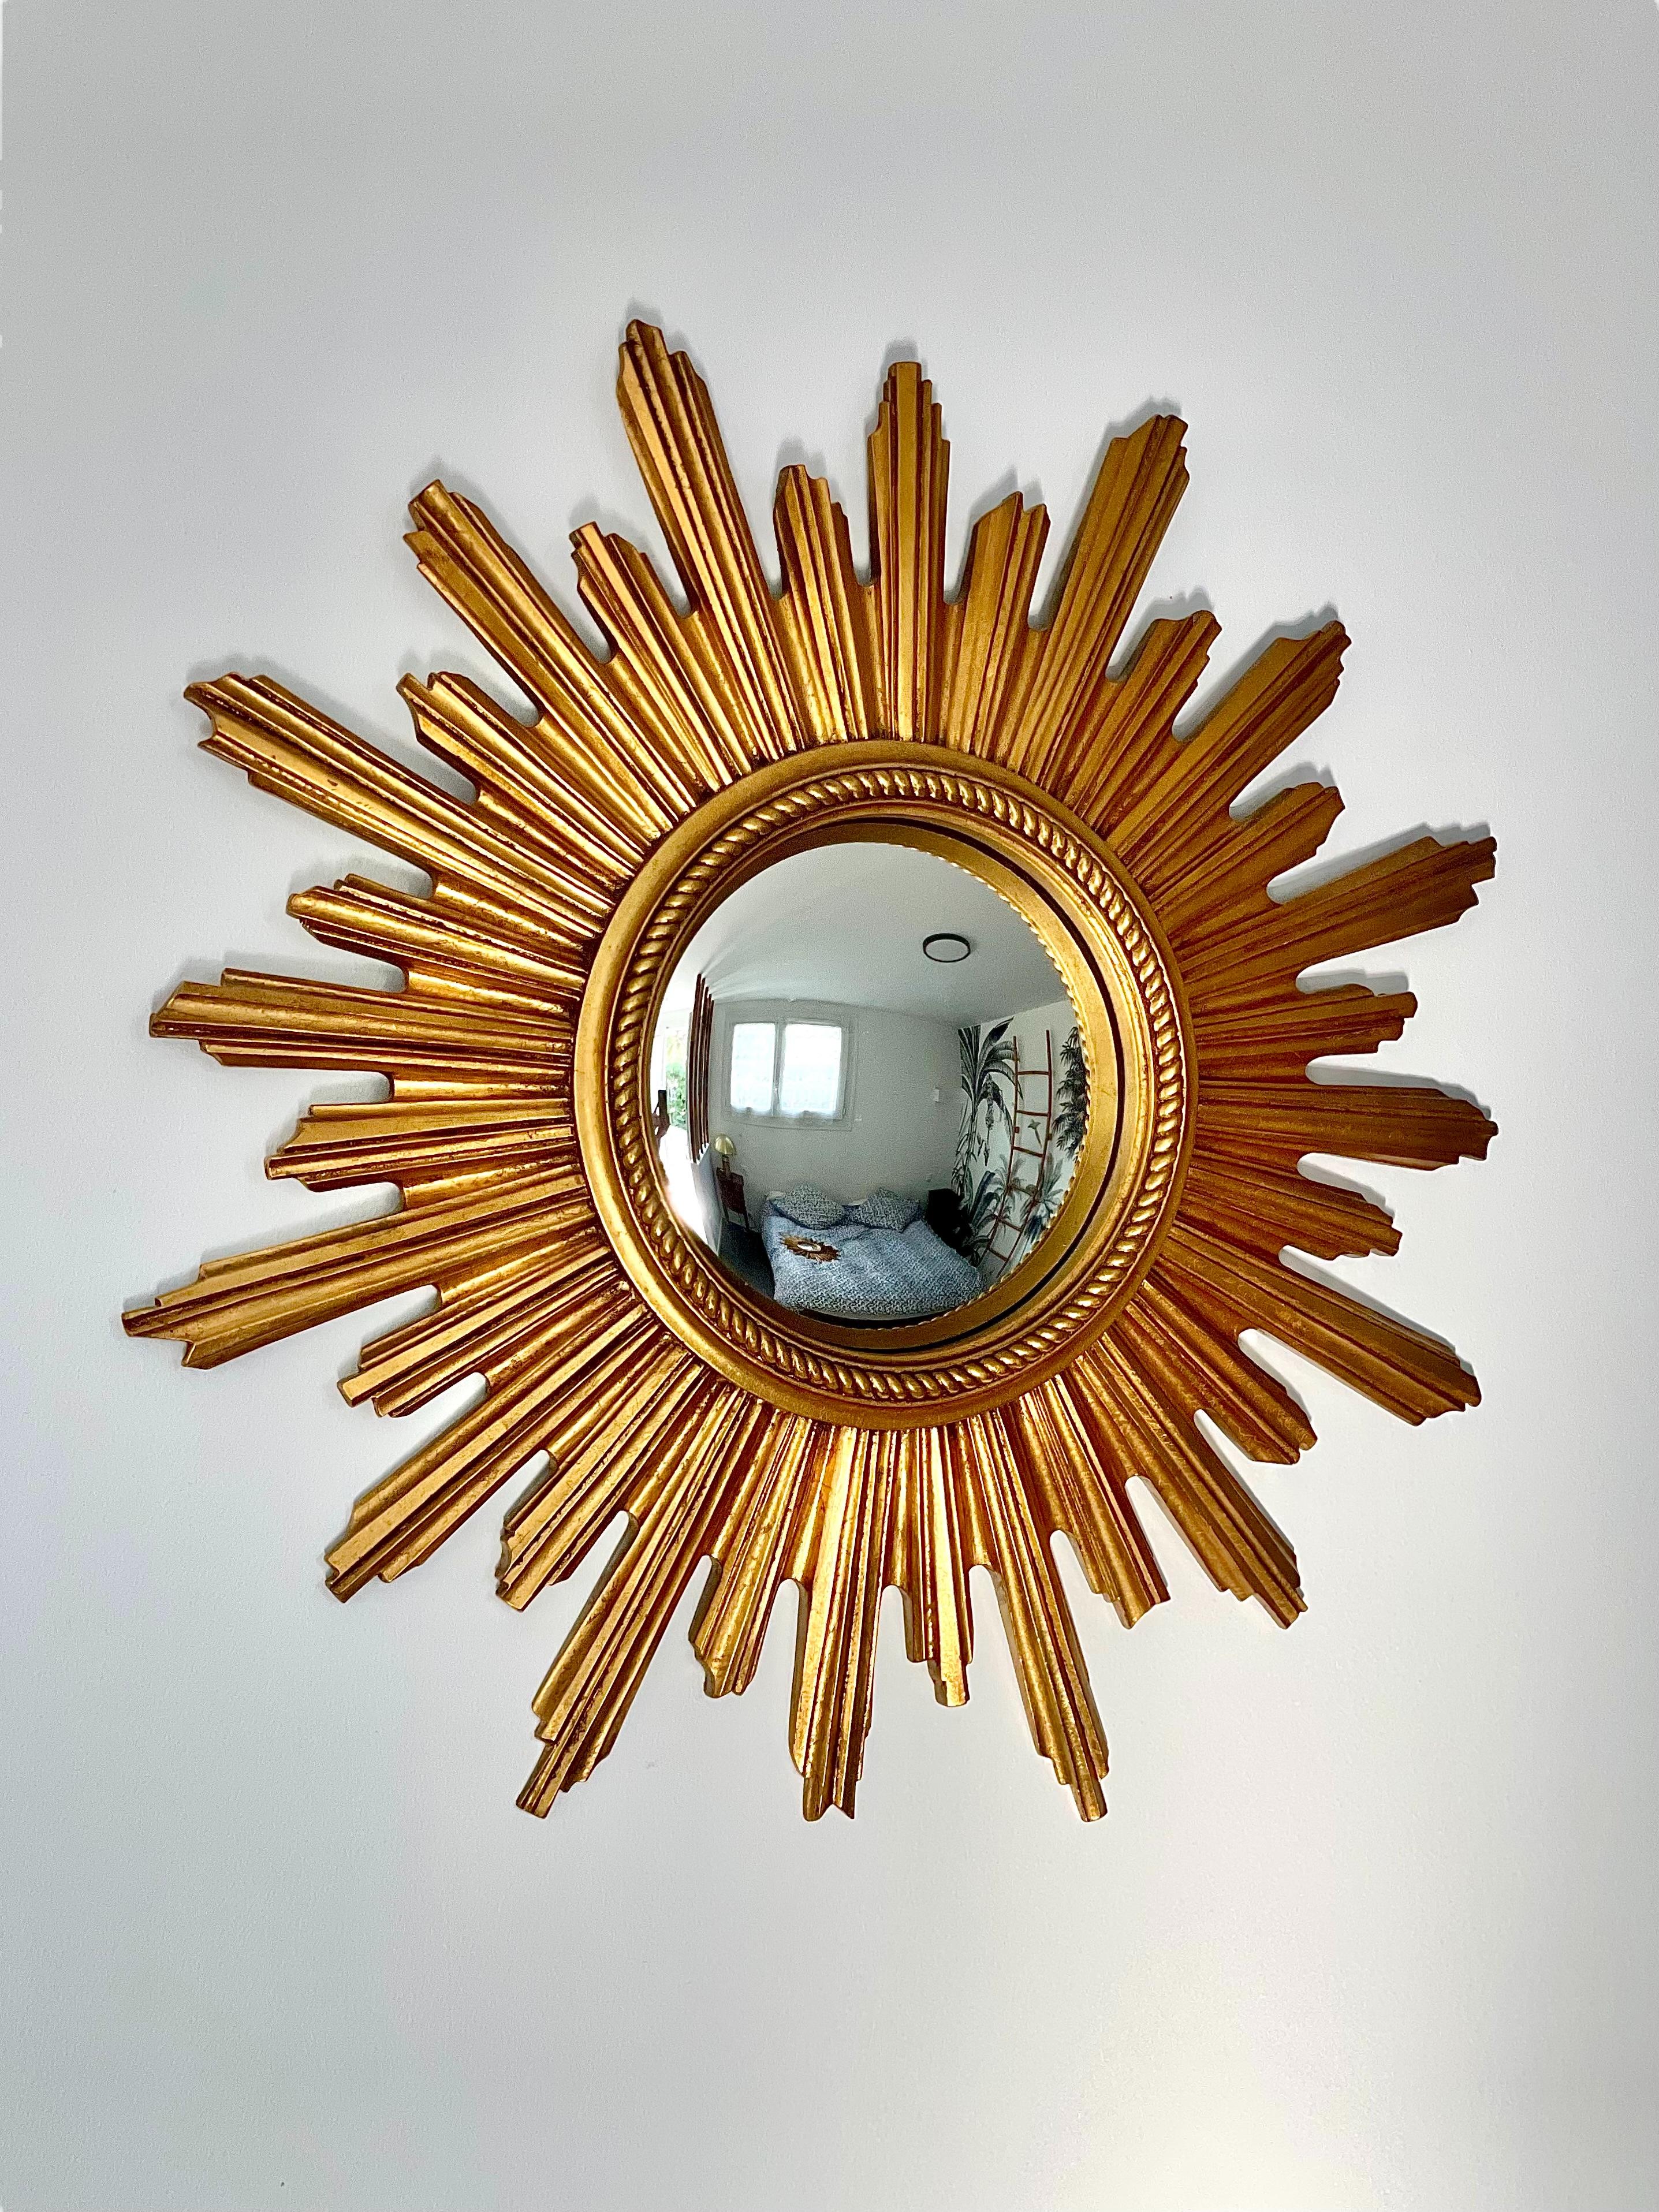 This stunning vintage sunburst wall mirror features a convex mirror plate, enclosed by a gleaming array of carved and gilded wooden rods, which imitate the rays of the sun. The mirror plate itself is bordered by a classic frame of twisted beading,